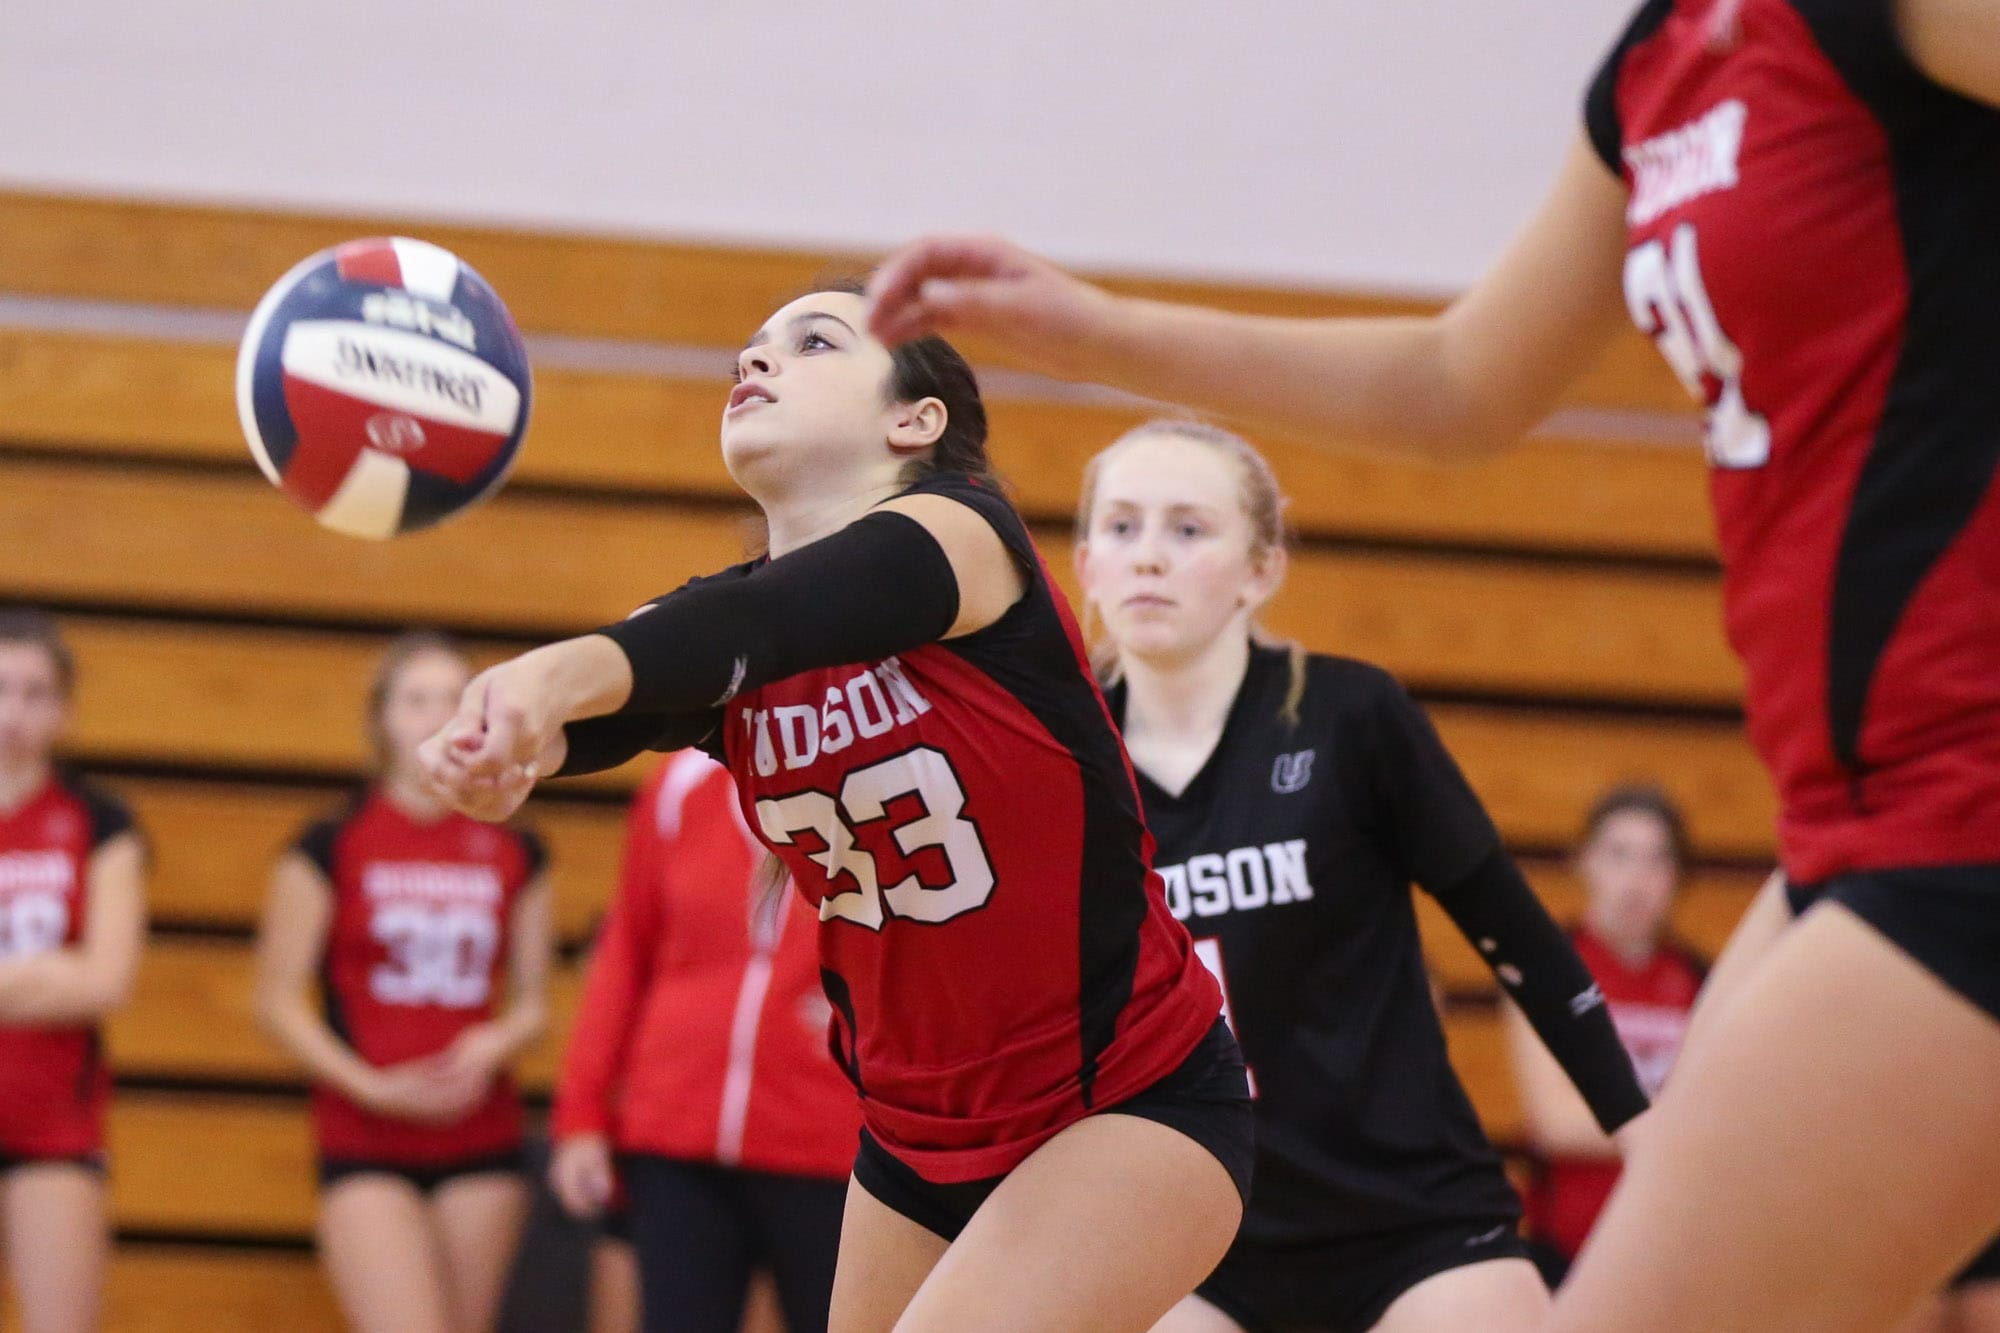 Hudson volleyball wins against Groton-Dunstable